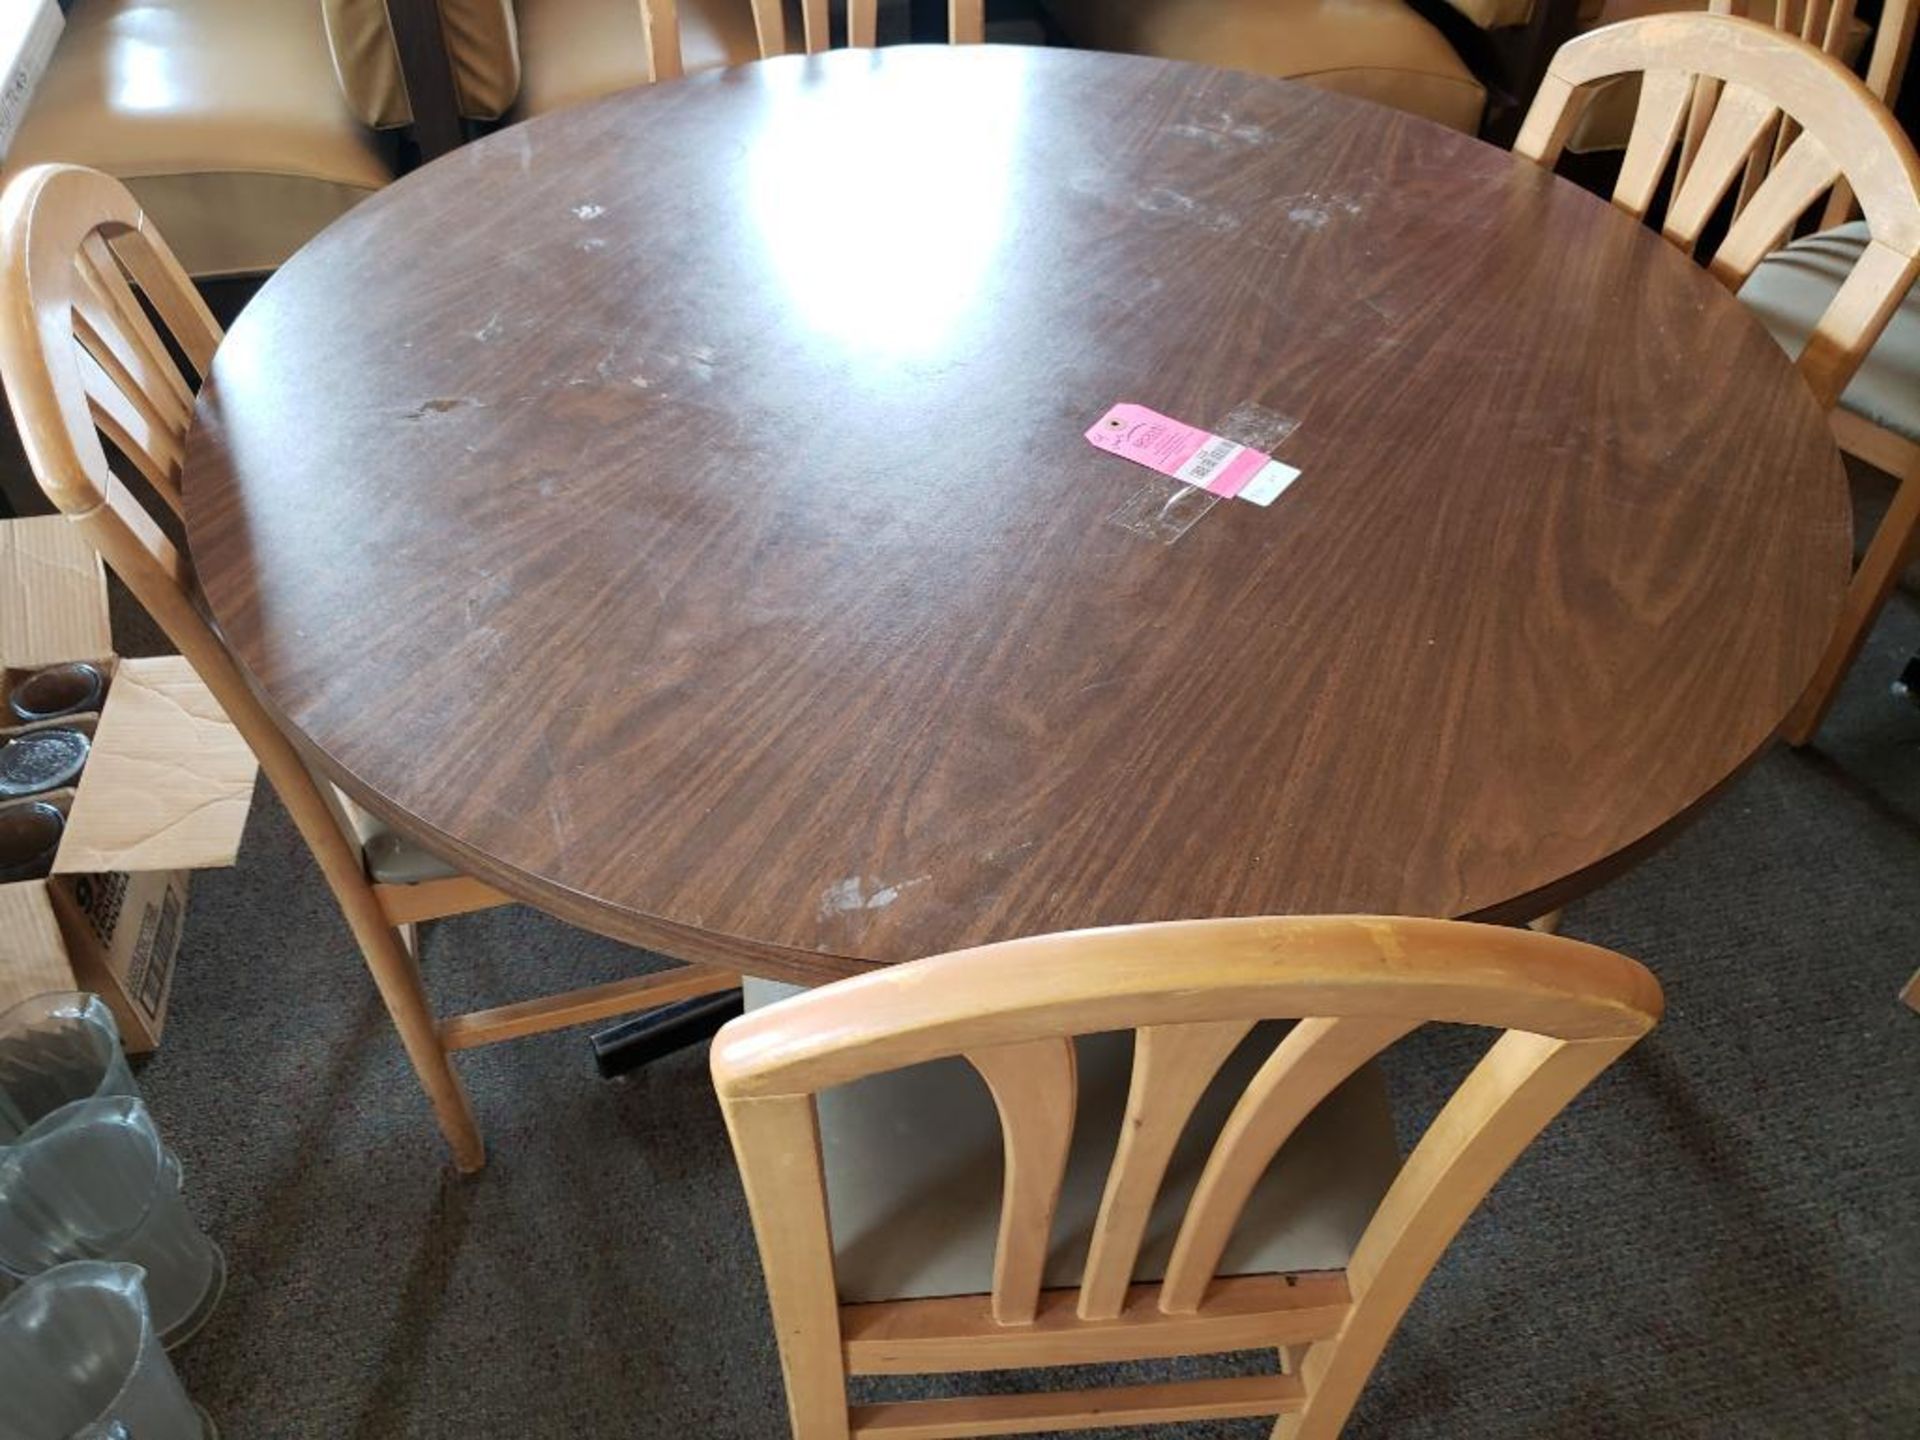 Table with 4 chairs. Table size 47in round. - Image 3 of 3